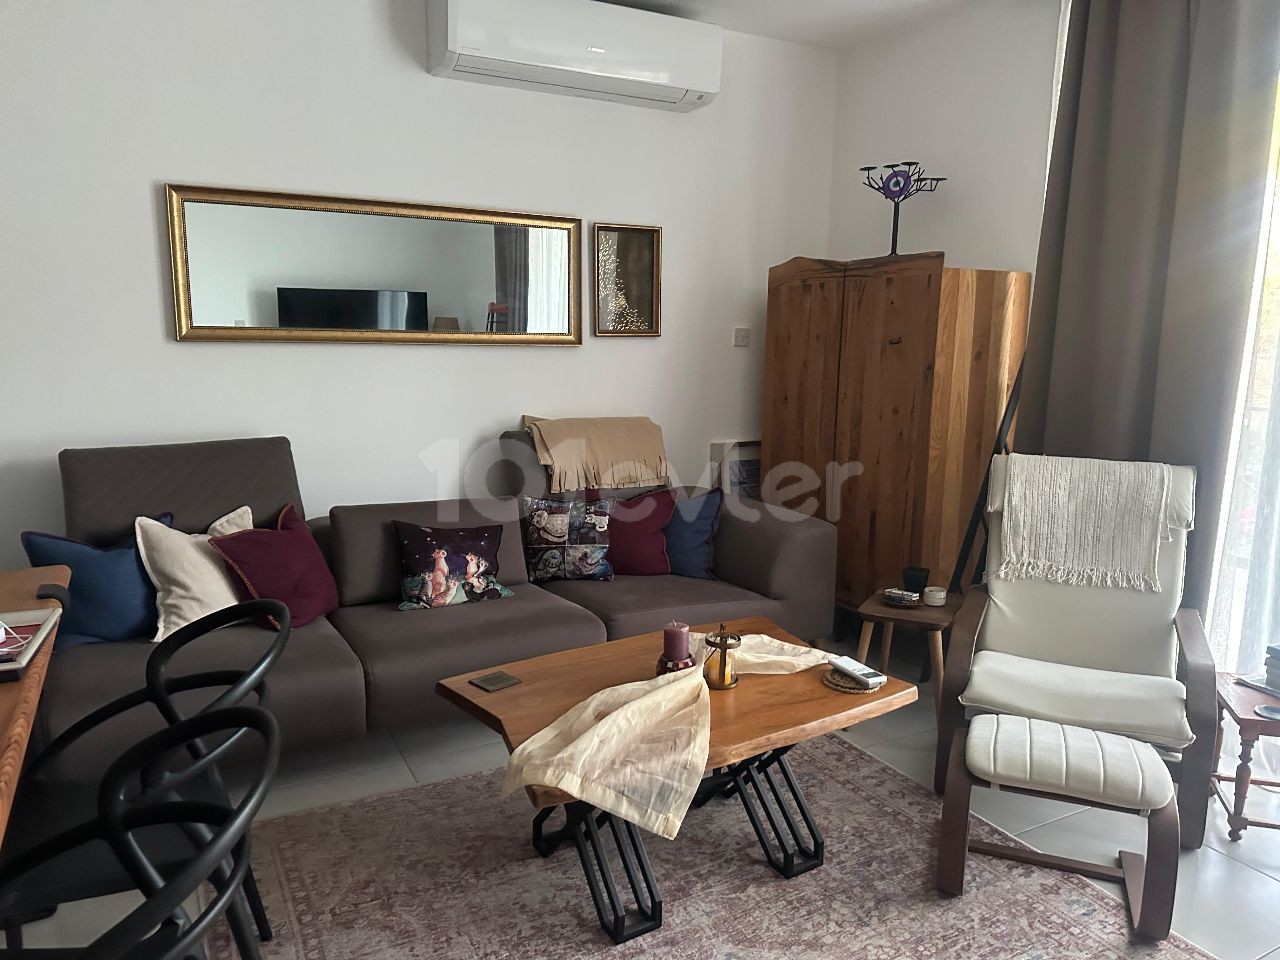 2+1 Flat for Rent in a Site with Sea View and Shared Pool in Karaoğlanoğlu Region of Redstone Island